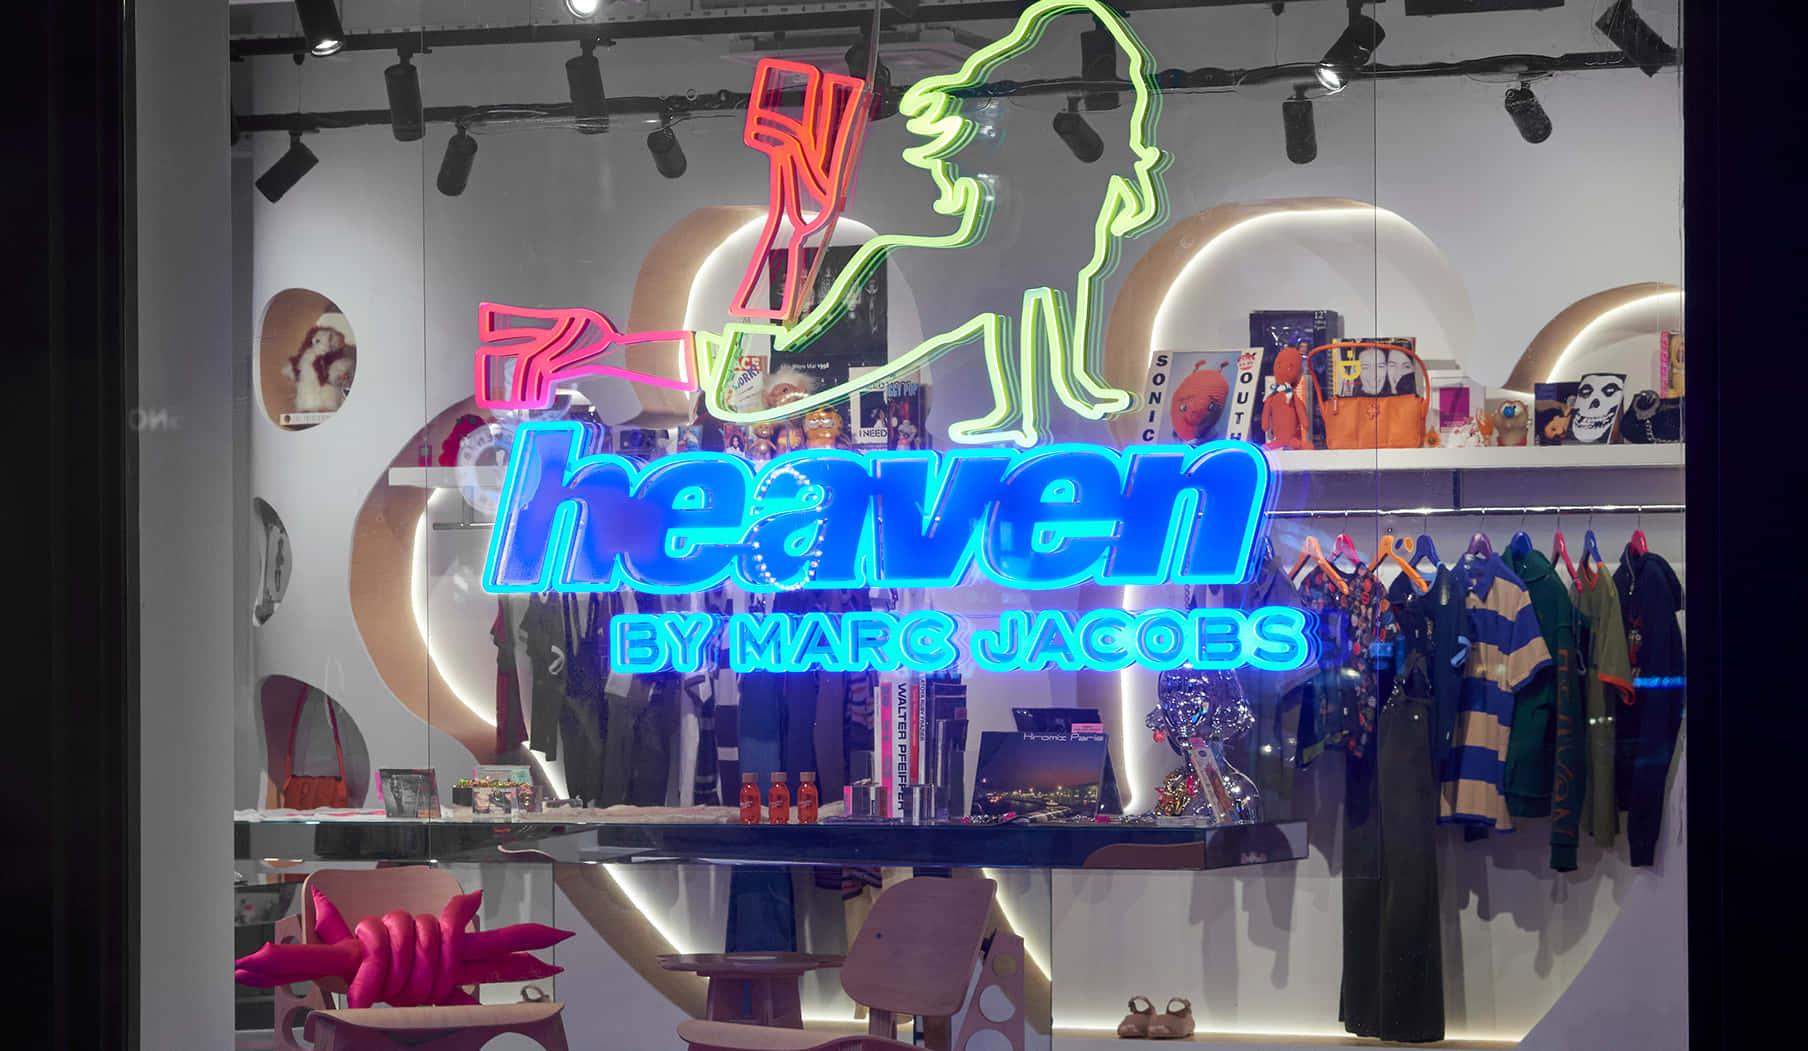 Heaven By Wrassler - A Neon Sign In A Store